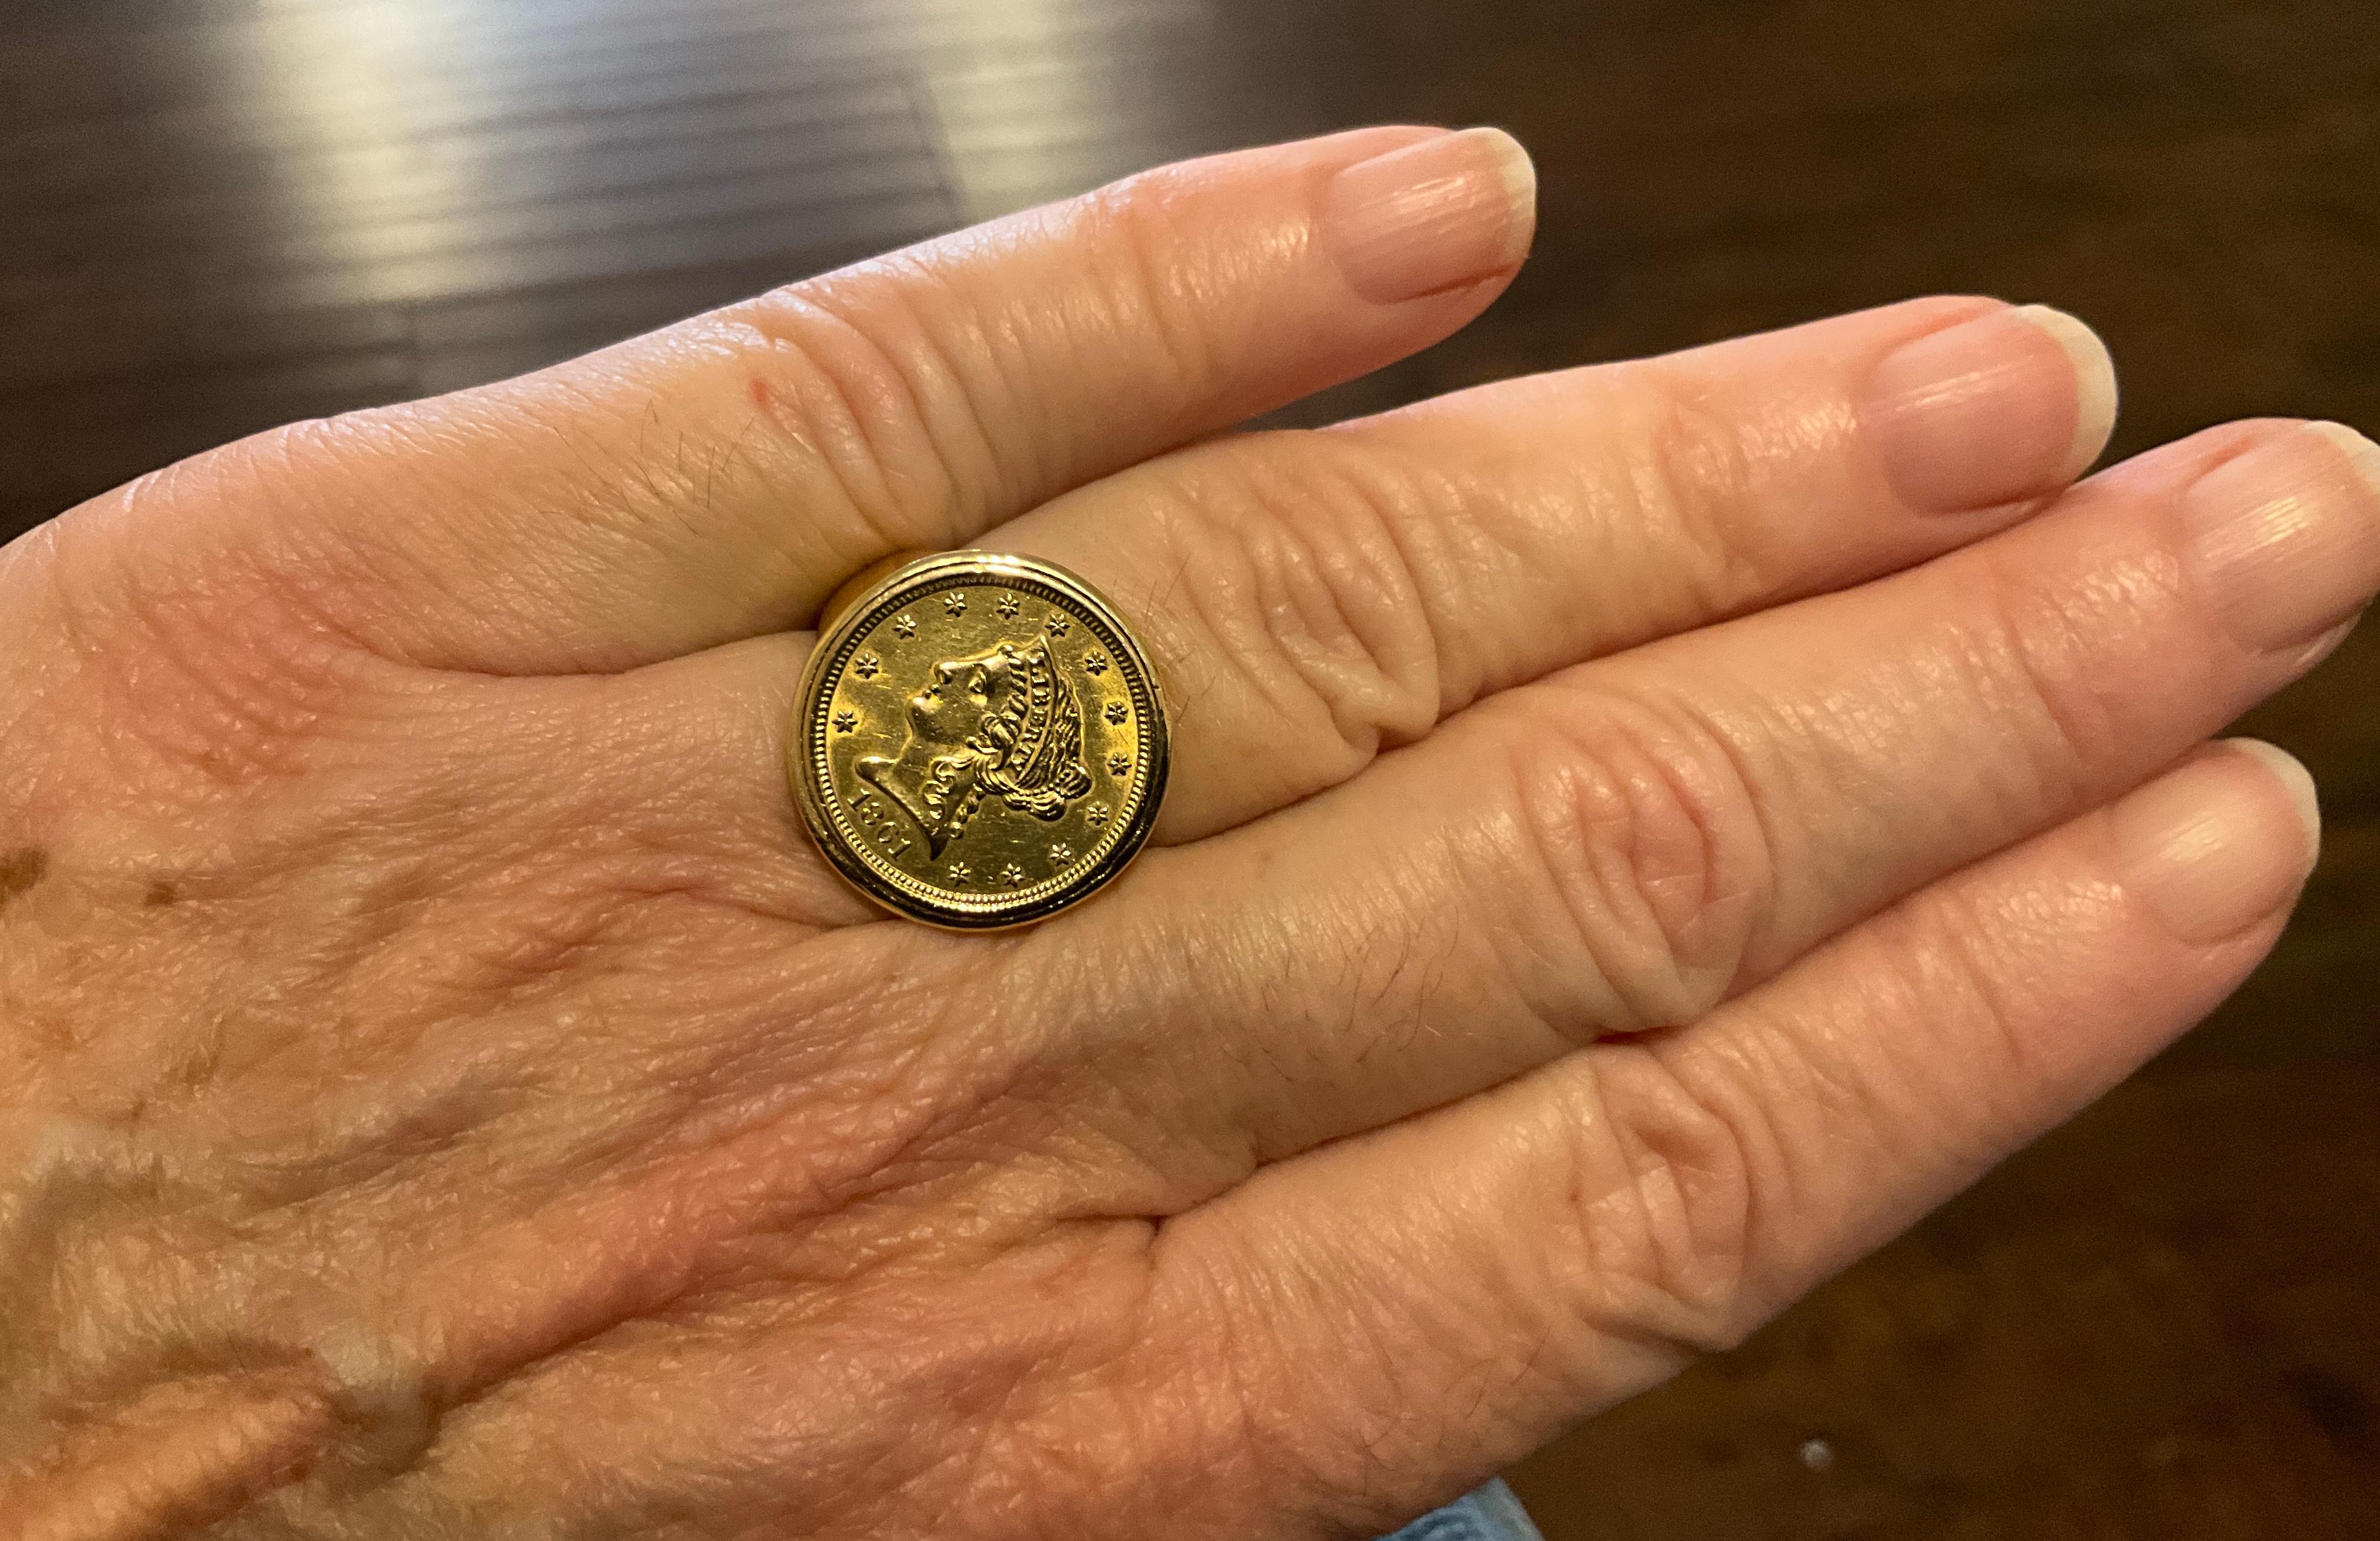 Antique 18K, 1861 American Liberty $2.50 Coin Signet Ring   3